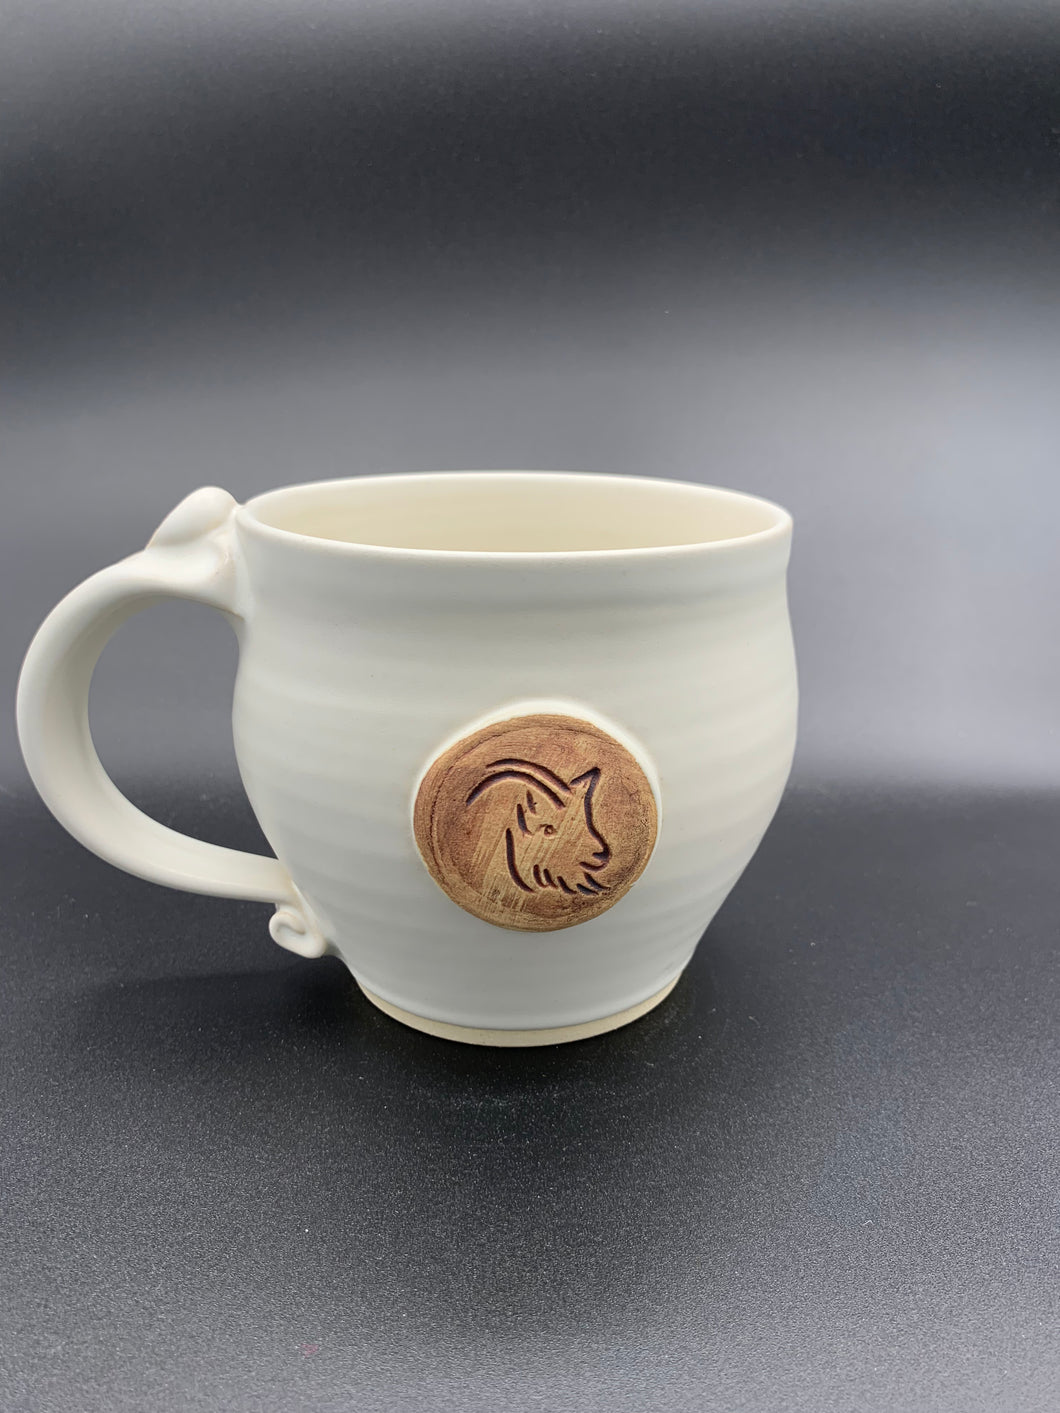 Latte/soup mug - Pan: the Greek god of all things wild, rustic music, and companion of the nymphs.